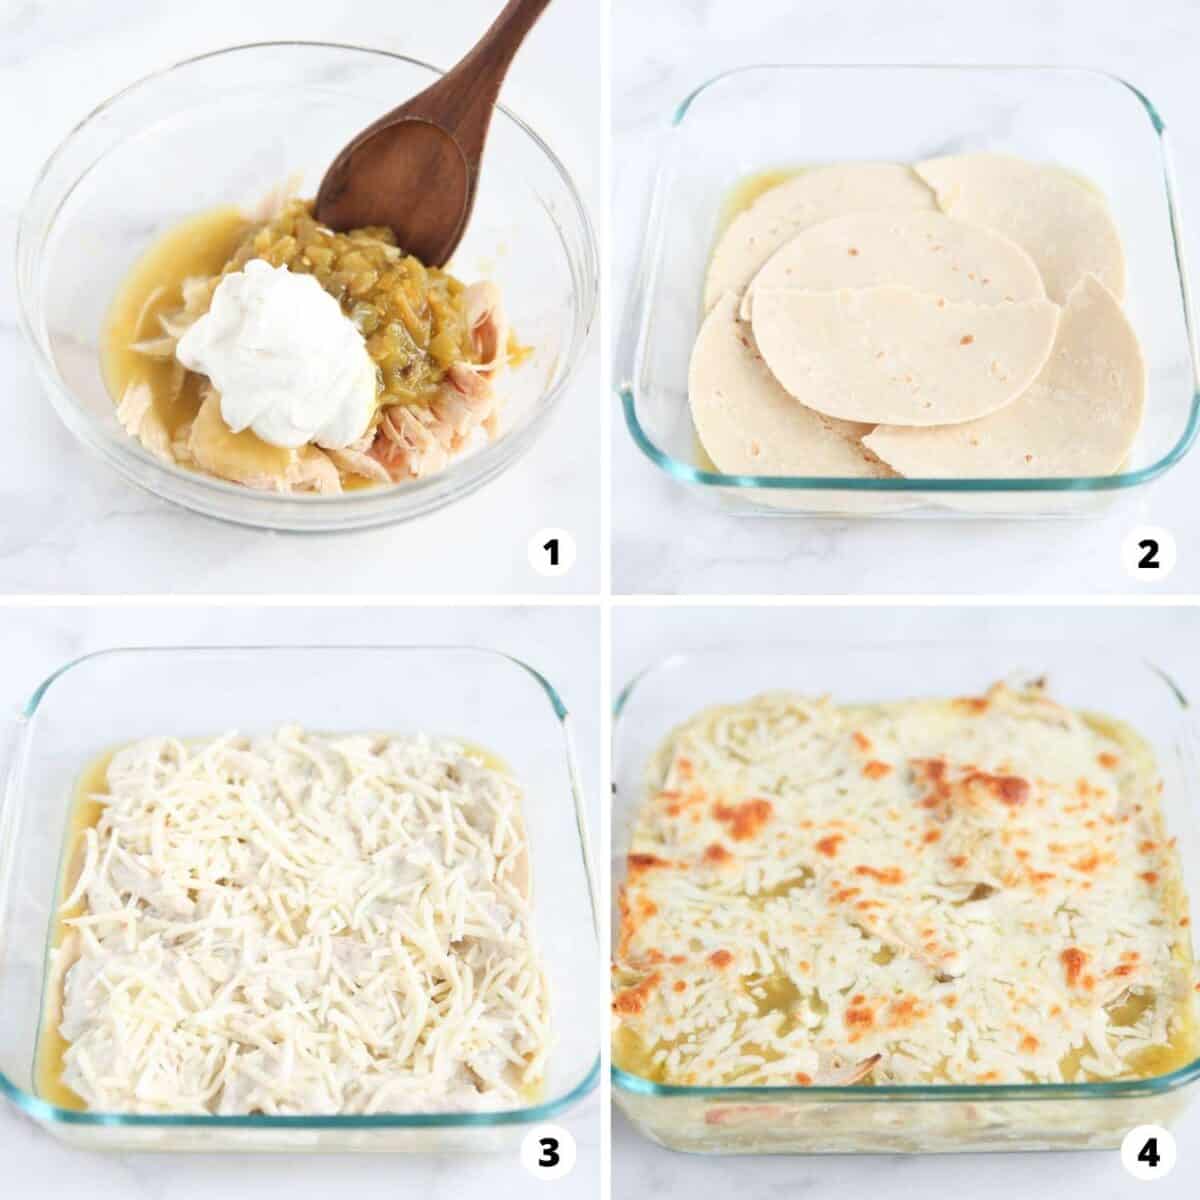 The process of showing how to make green chicken enchilada casserole in a 4 step collage.